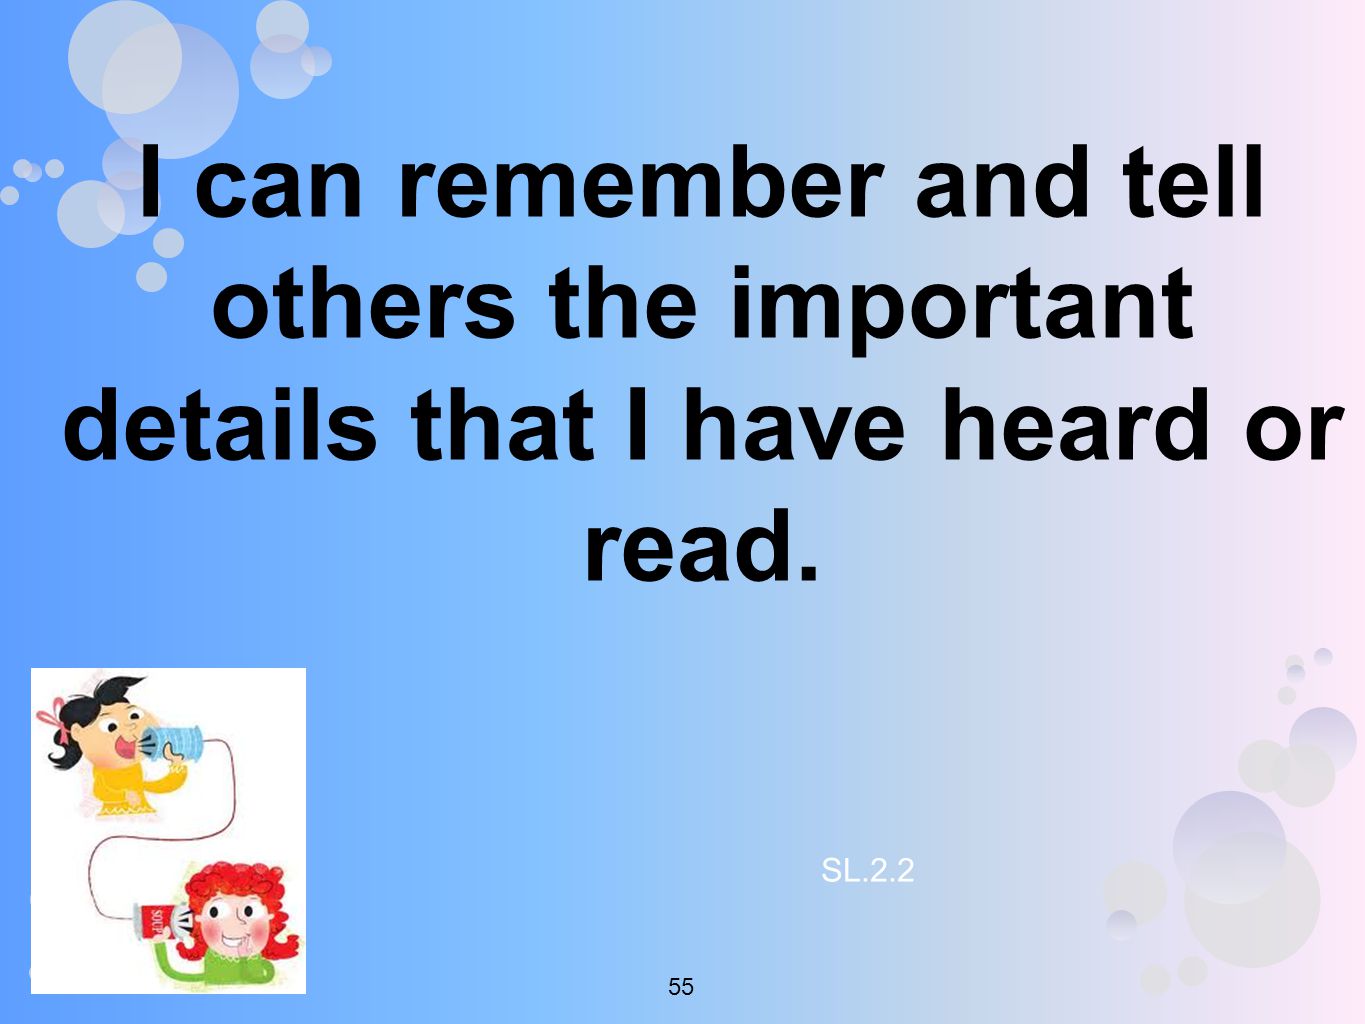 I can remember and tell others the important details that I have heard or read. SL